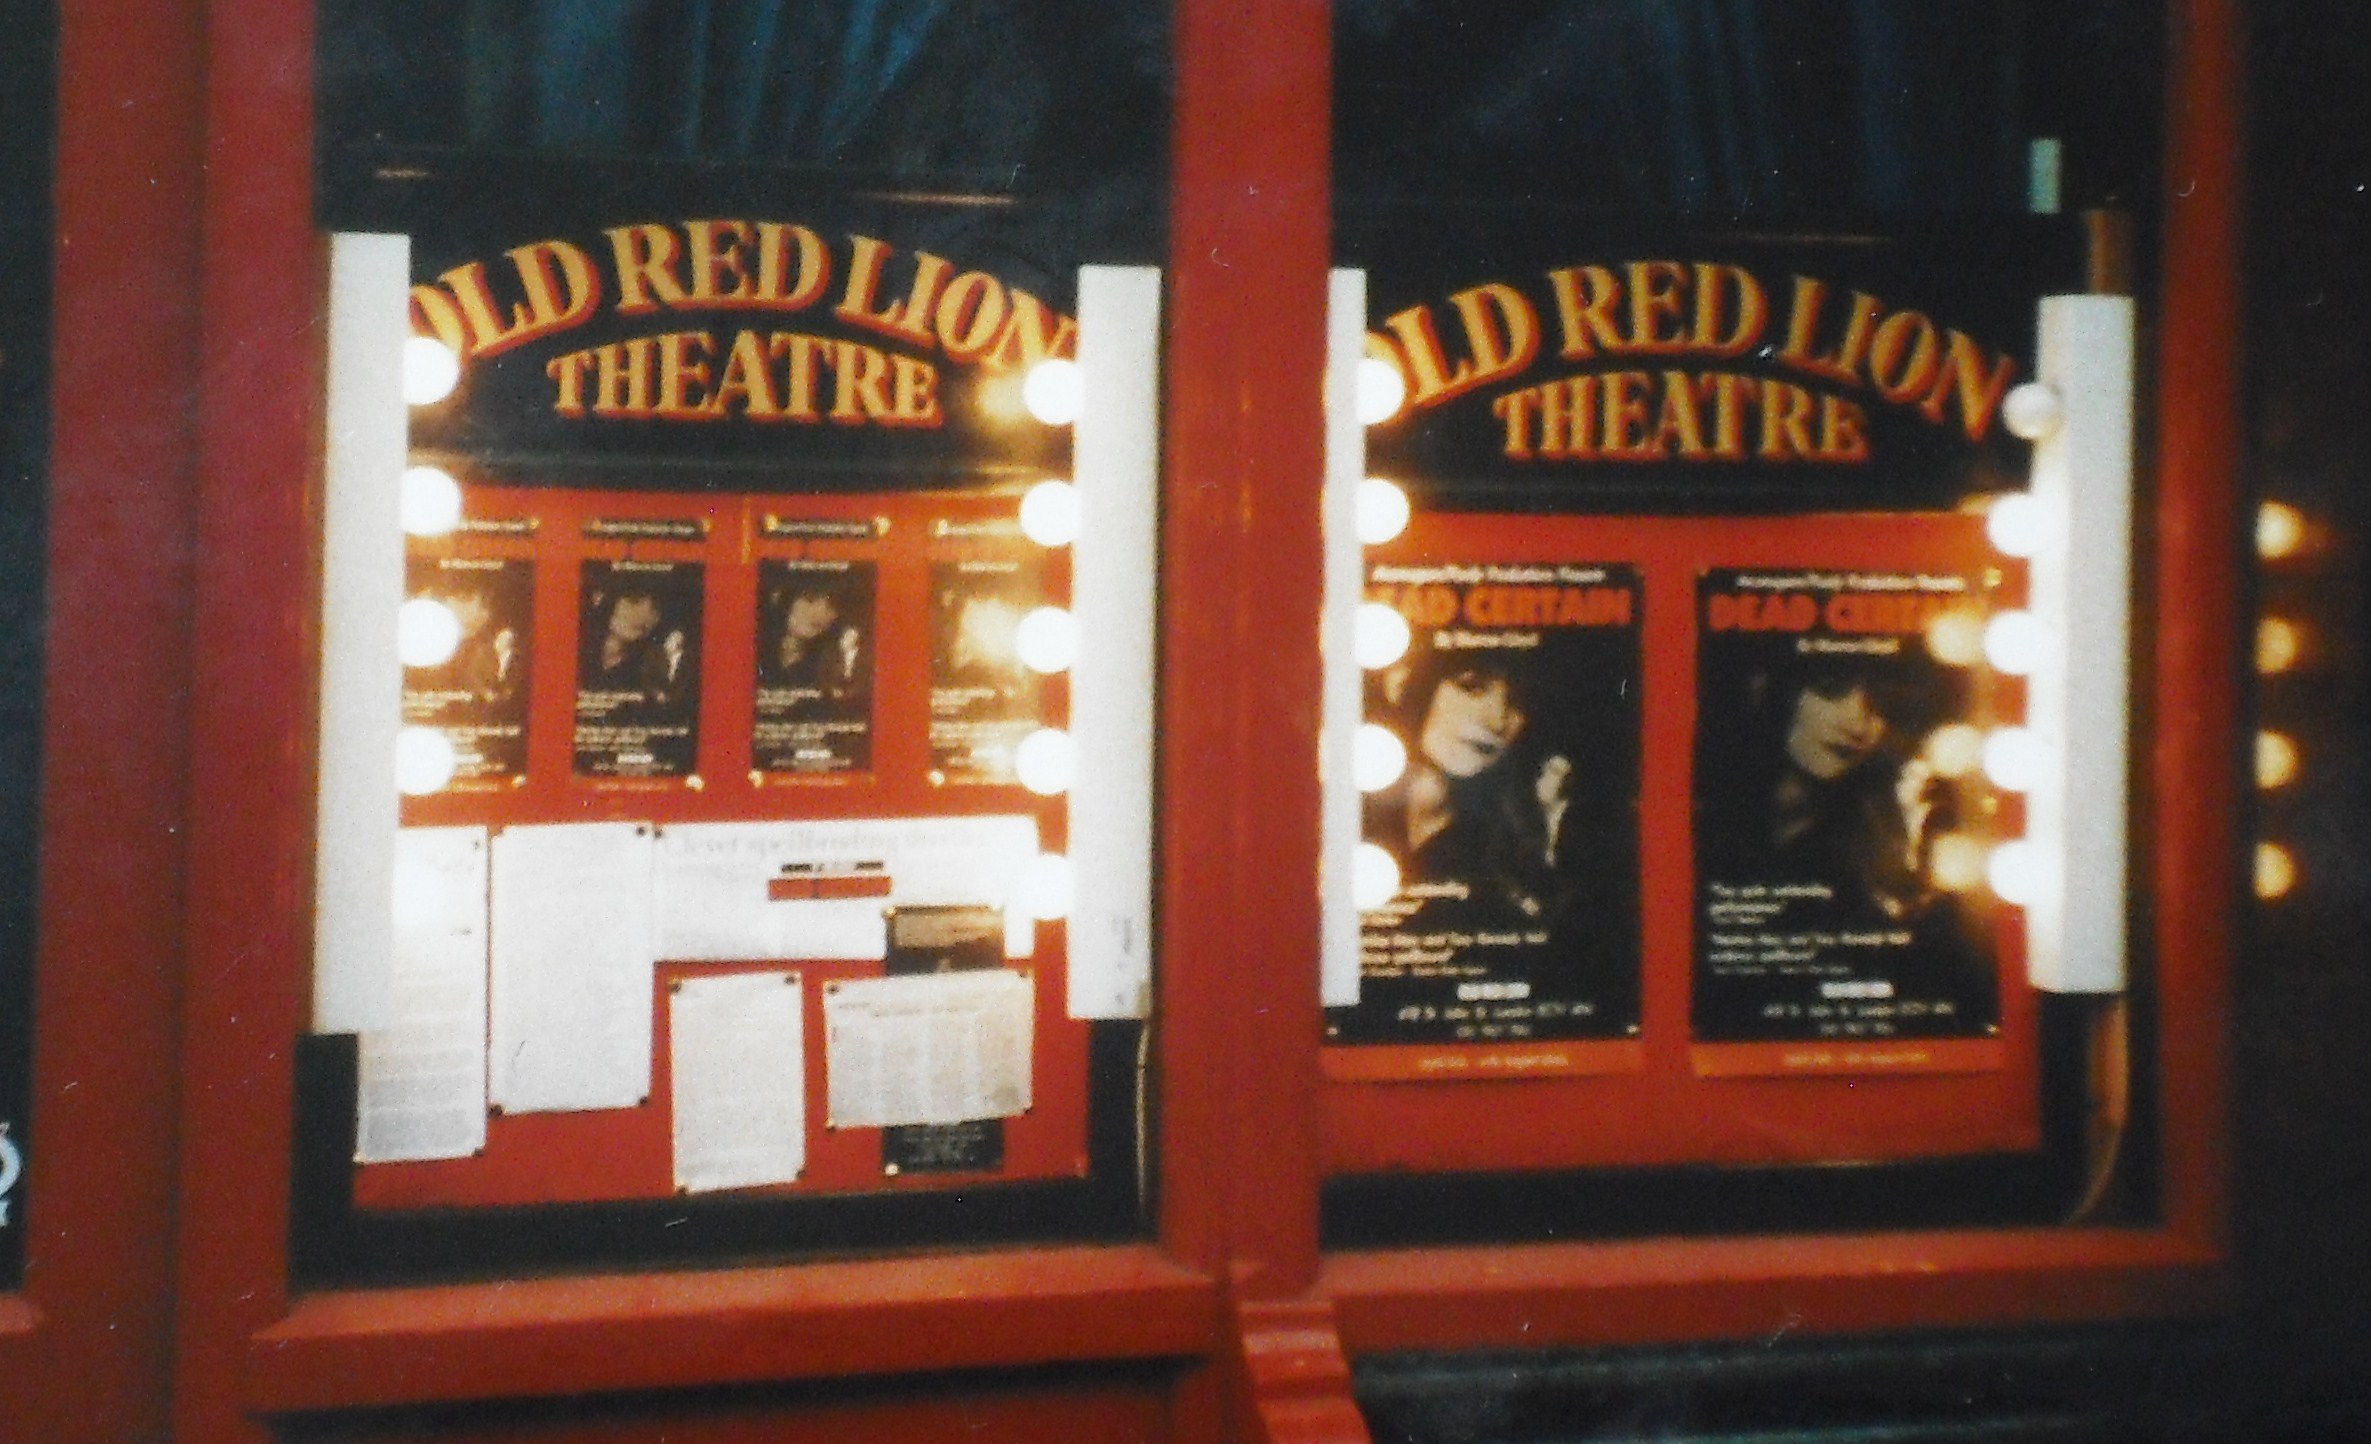 The Old Red Lion